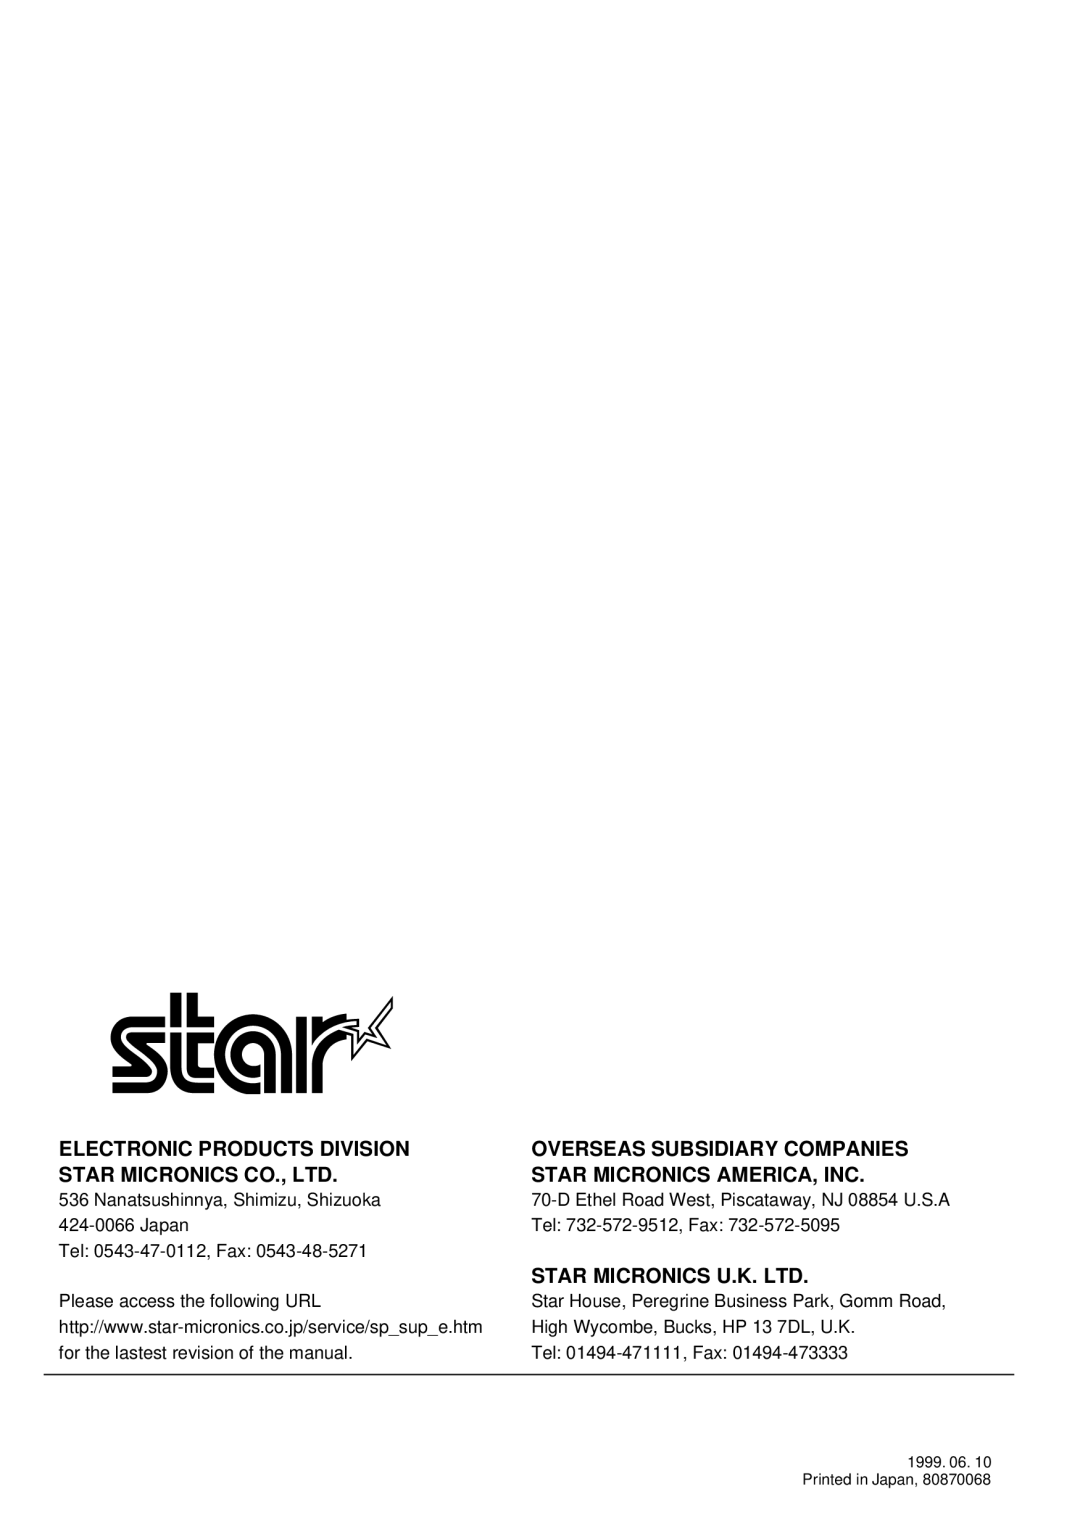 Star Micronics SP298 user manual Electronic Products Division, Overseas Subsidiary Companies, Star Micronics America, Inc 